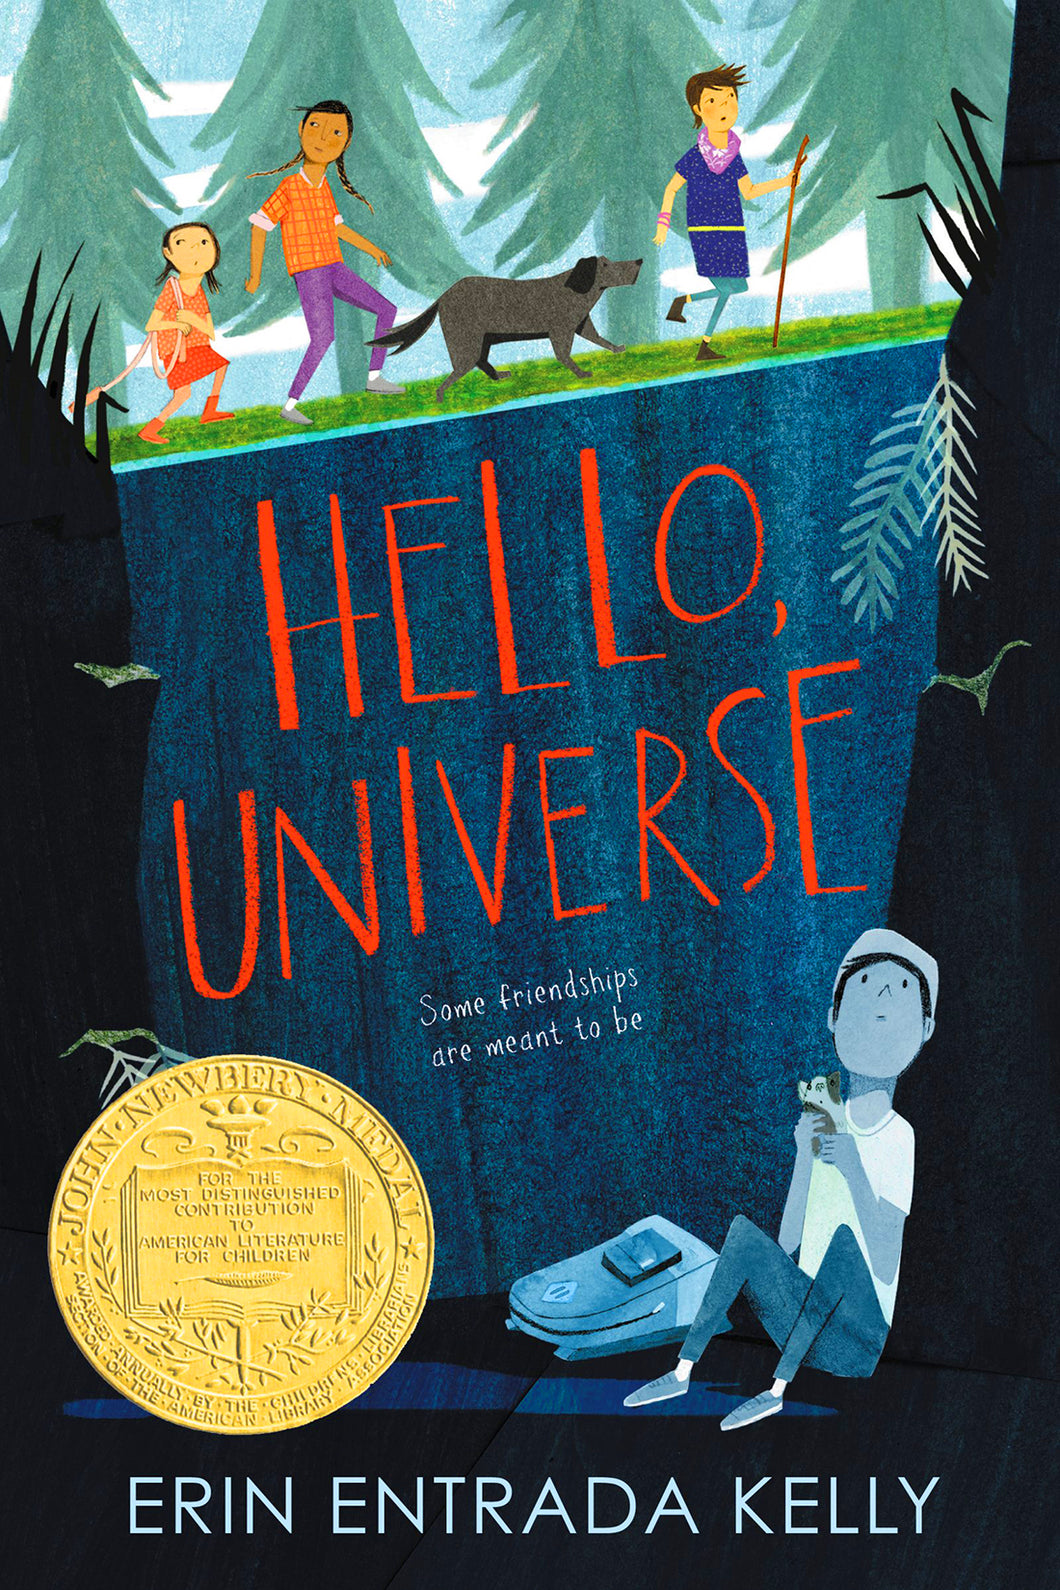 Hello, Universe by Erin Entrada Kelly / Hardcover or Paperback - NEW BOOK (English or Spanish)